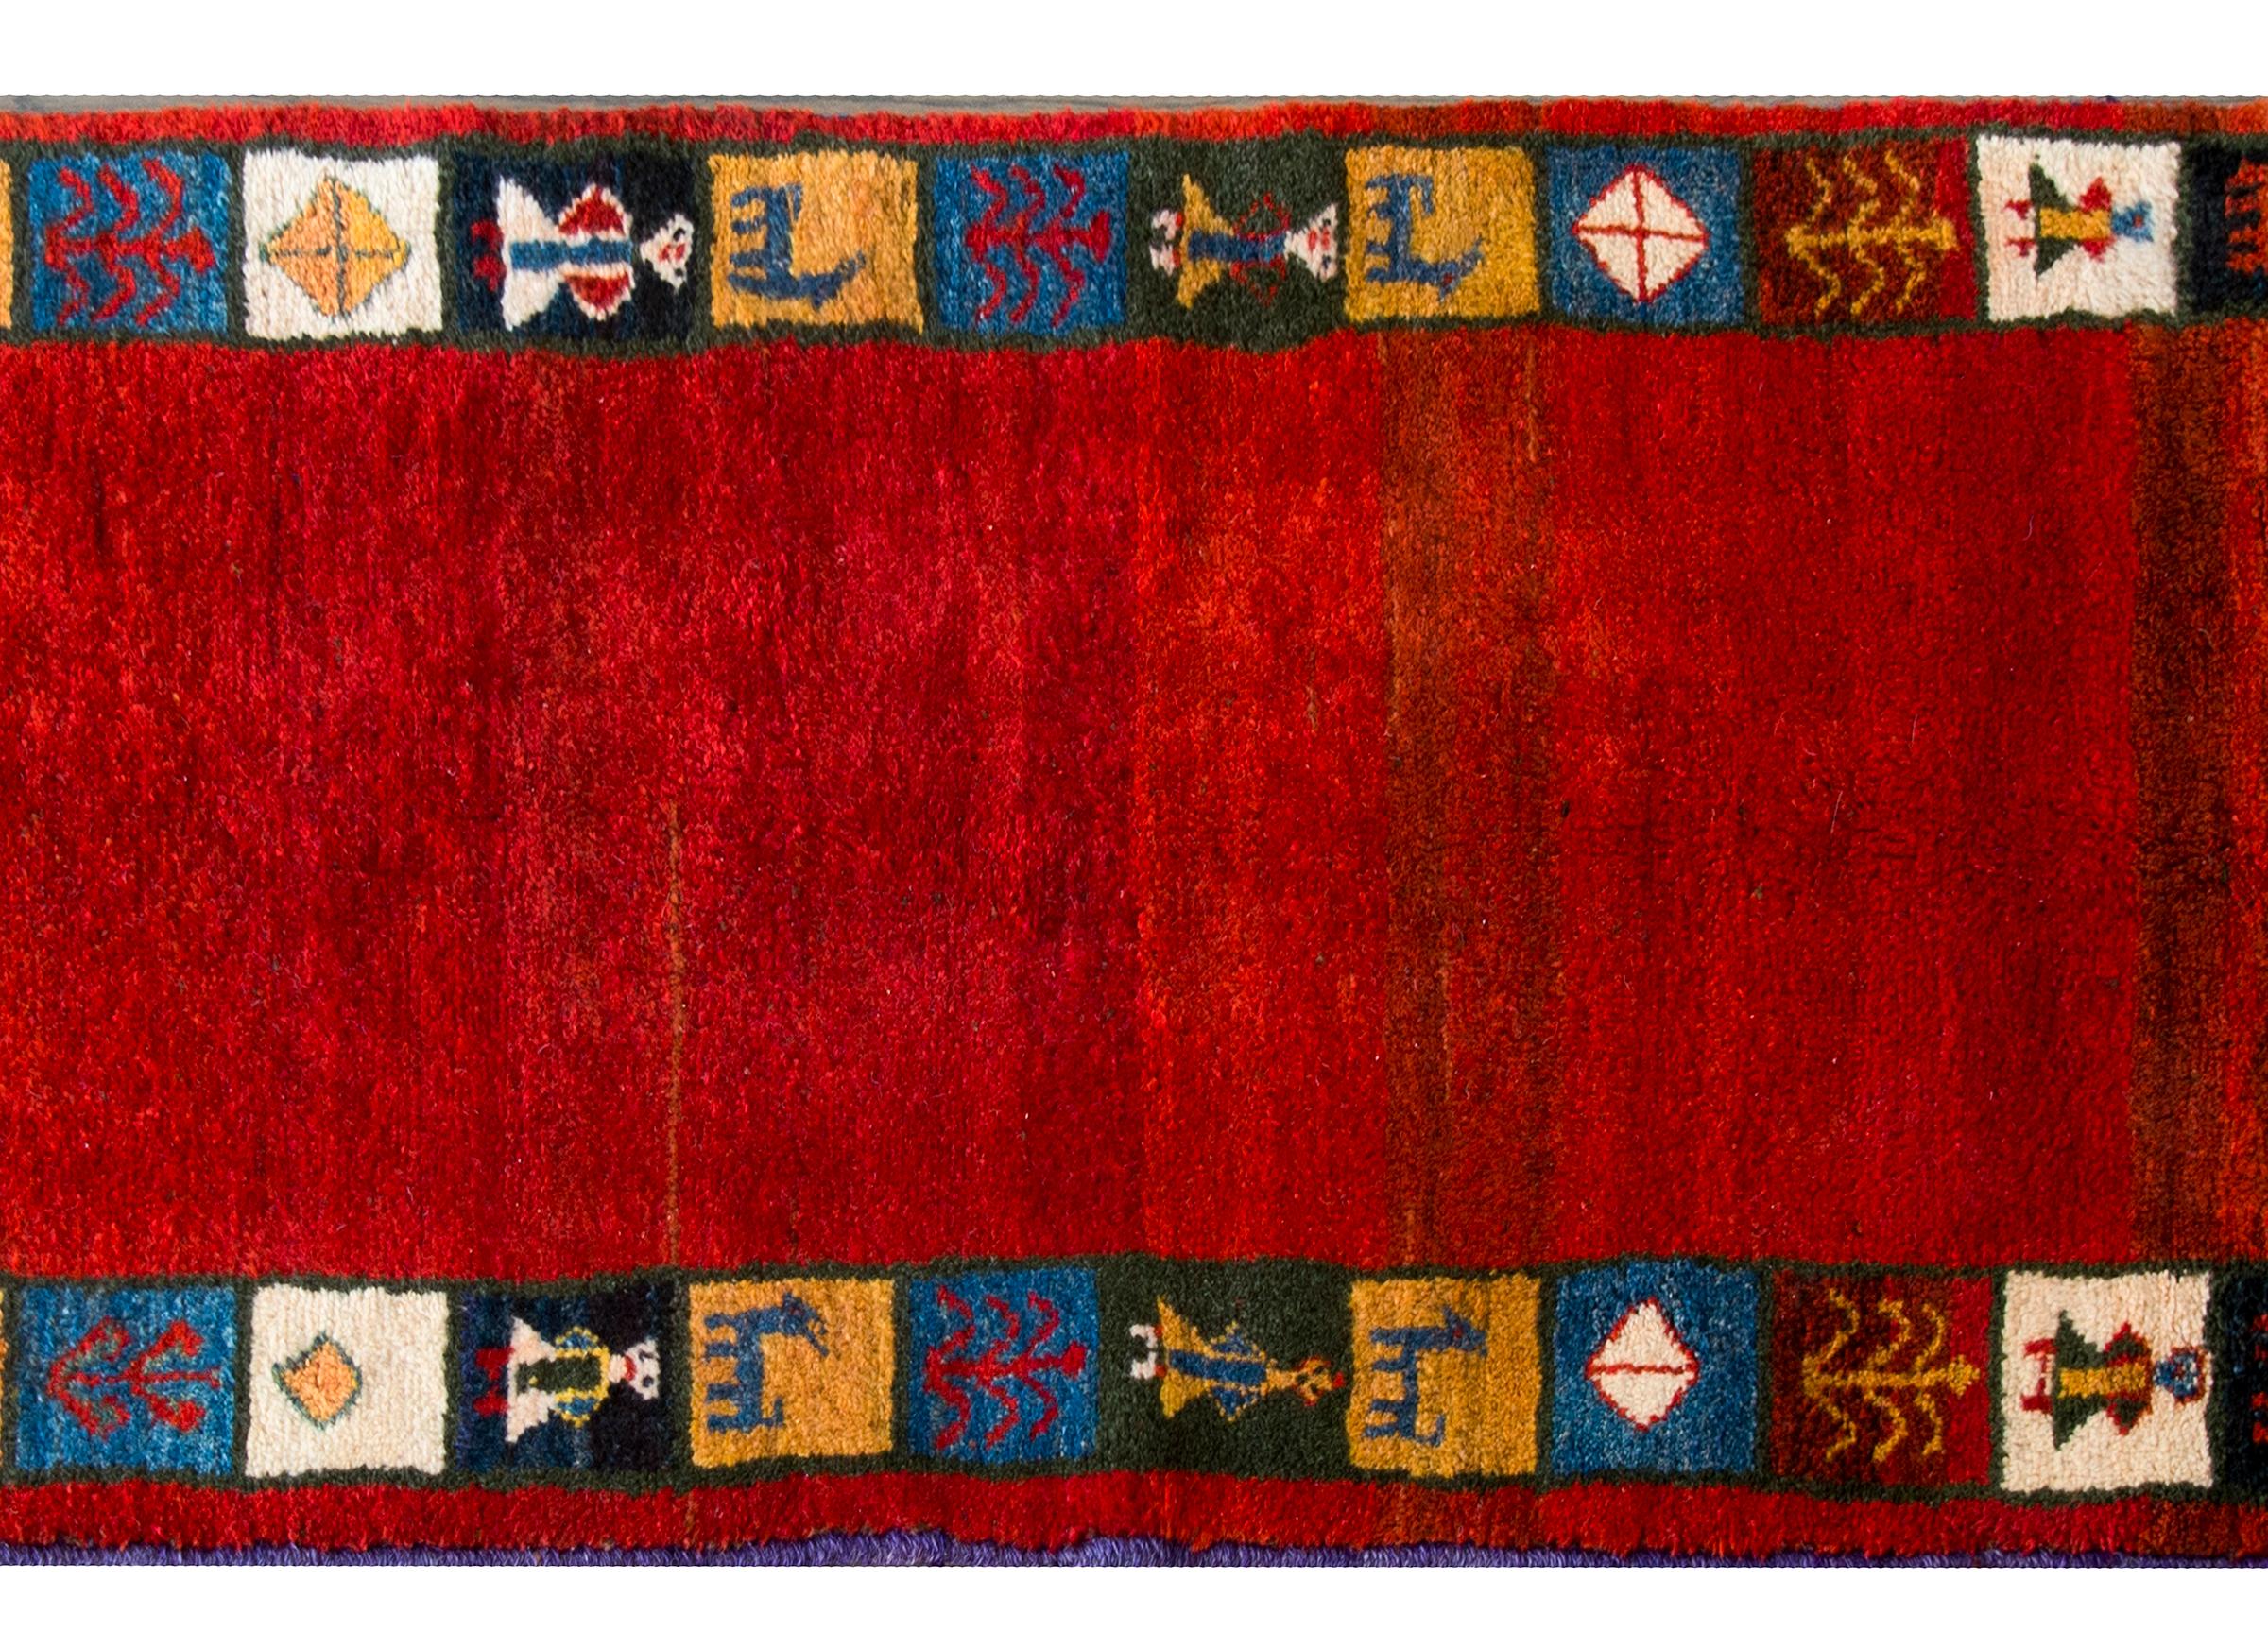 A gorgeous mid-20th century Persian Gabbeh rug with a bold abrash crimson field surrounded by myriad squares with stylized goats, people and trees-of-life woven in gold, indigo, green, and crimson.